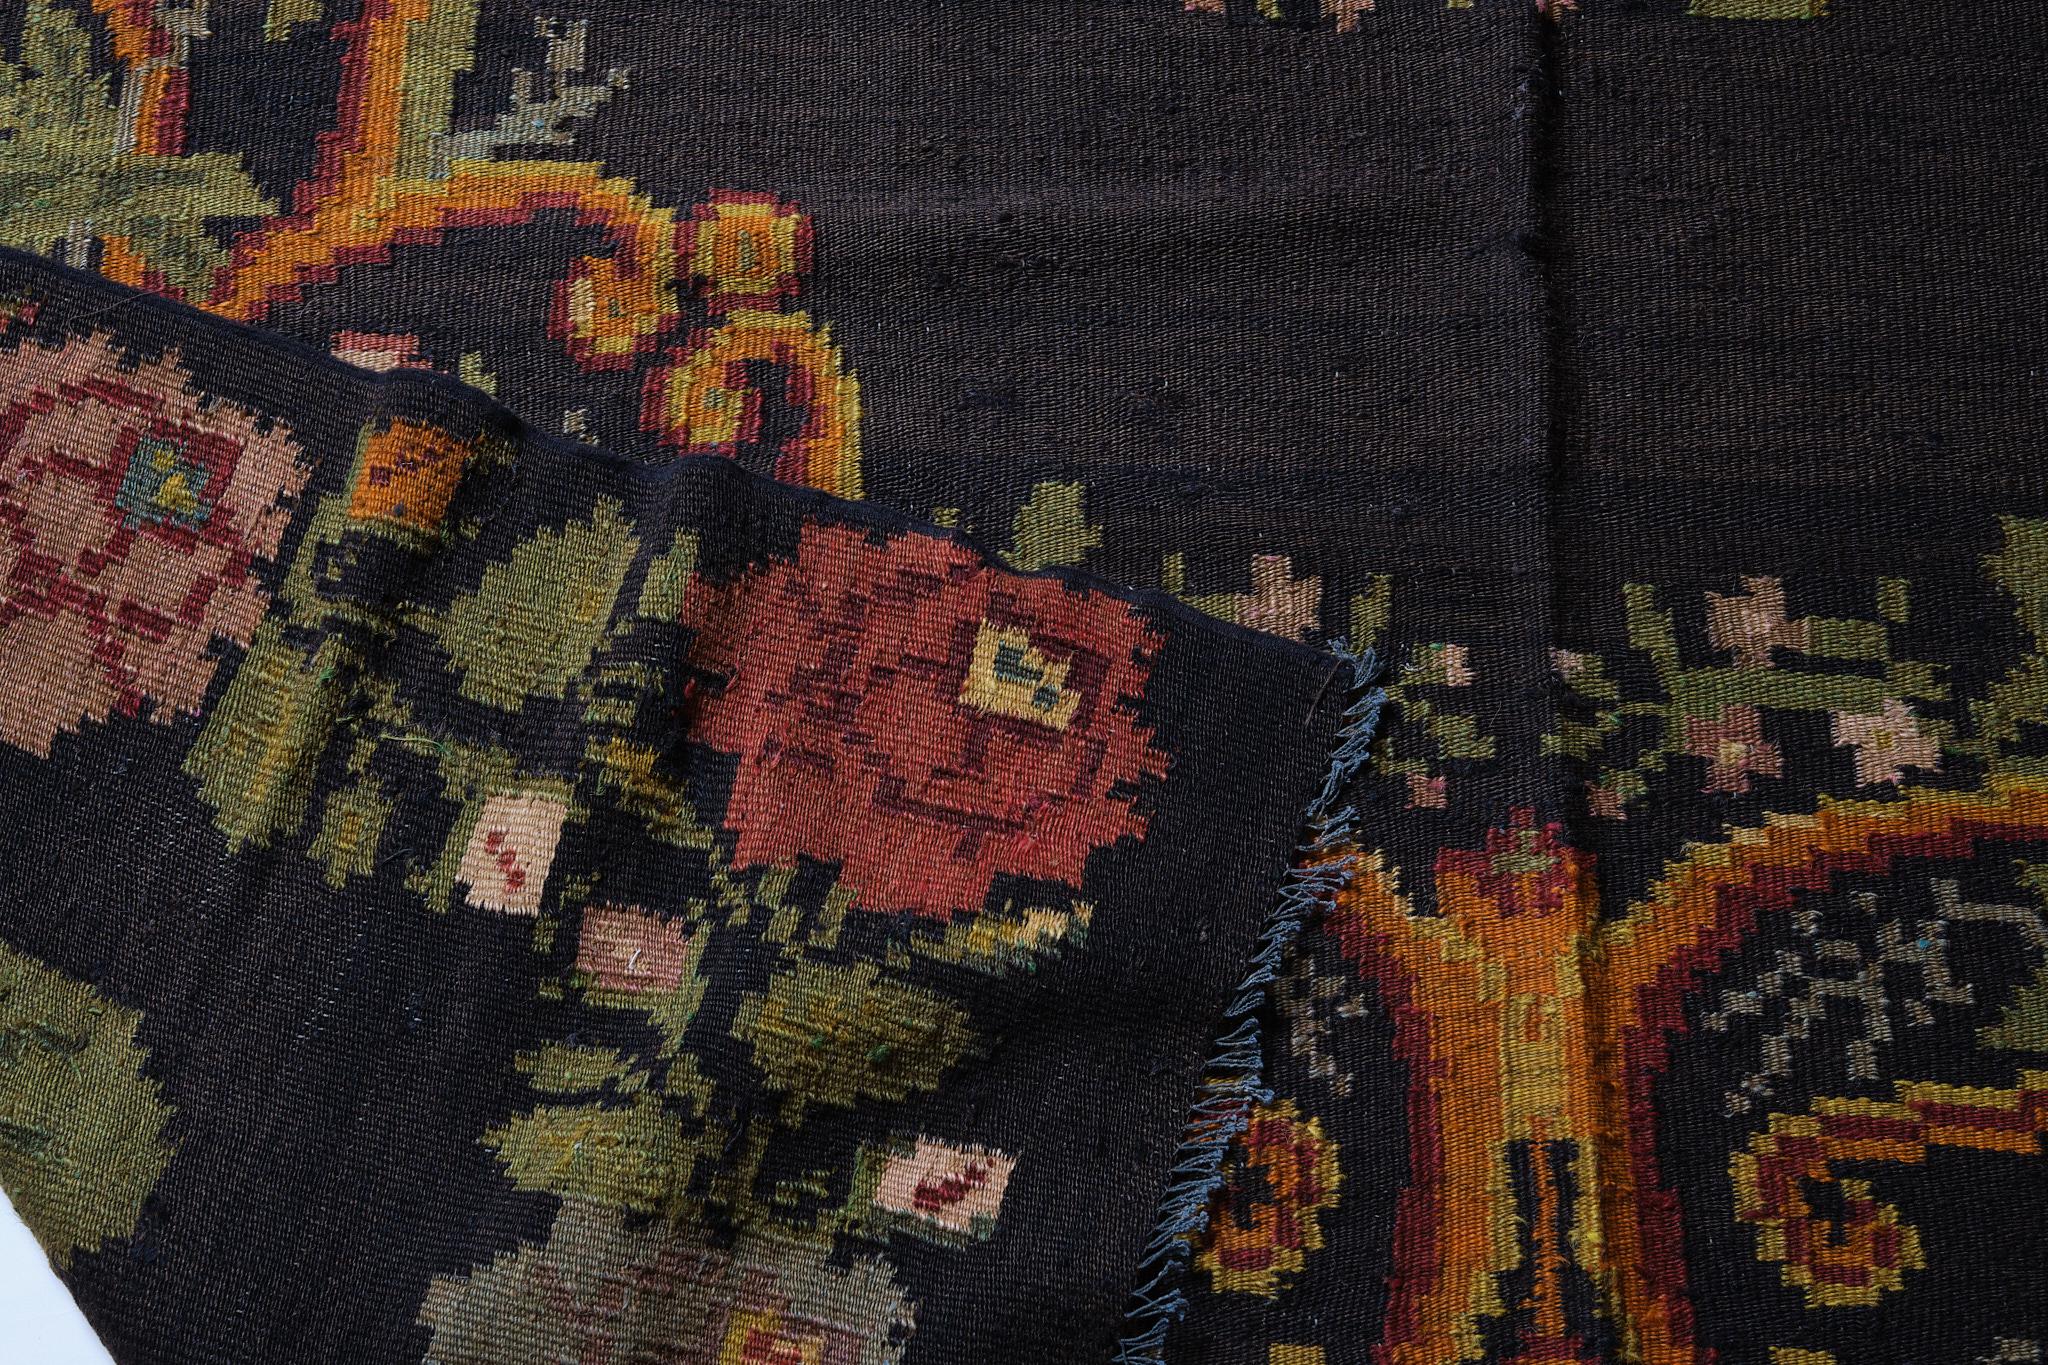 This is a Vintage Old Bessarabian Kilim Rug from Moldova with a rare and beautiful color composition.

Today it is a landlocked country in Eastern Europe, bordering Romania and Ukraine. Although it is now an independent country, it has been ruled